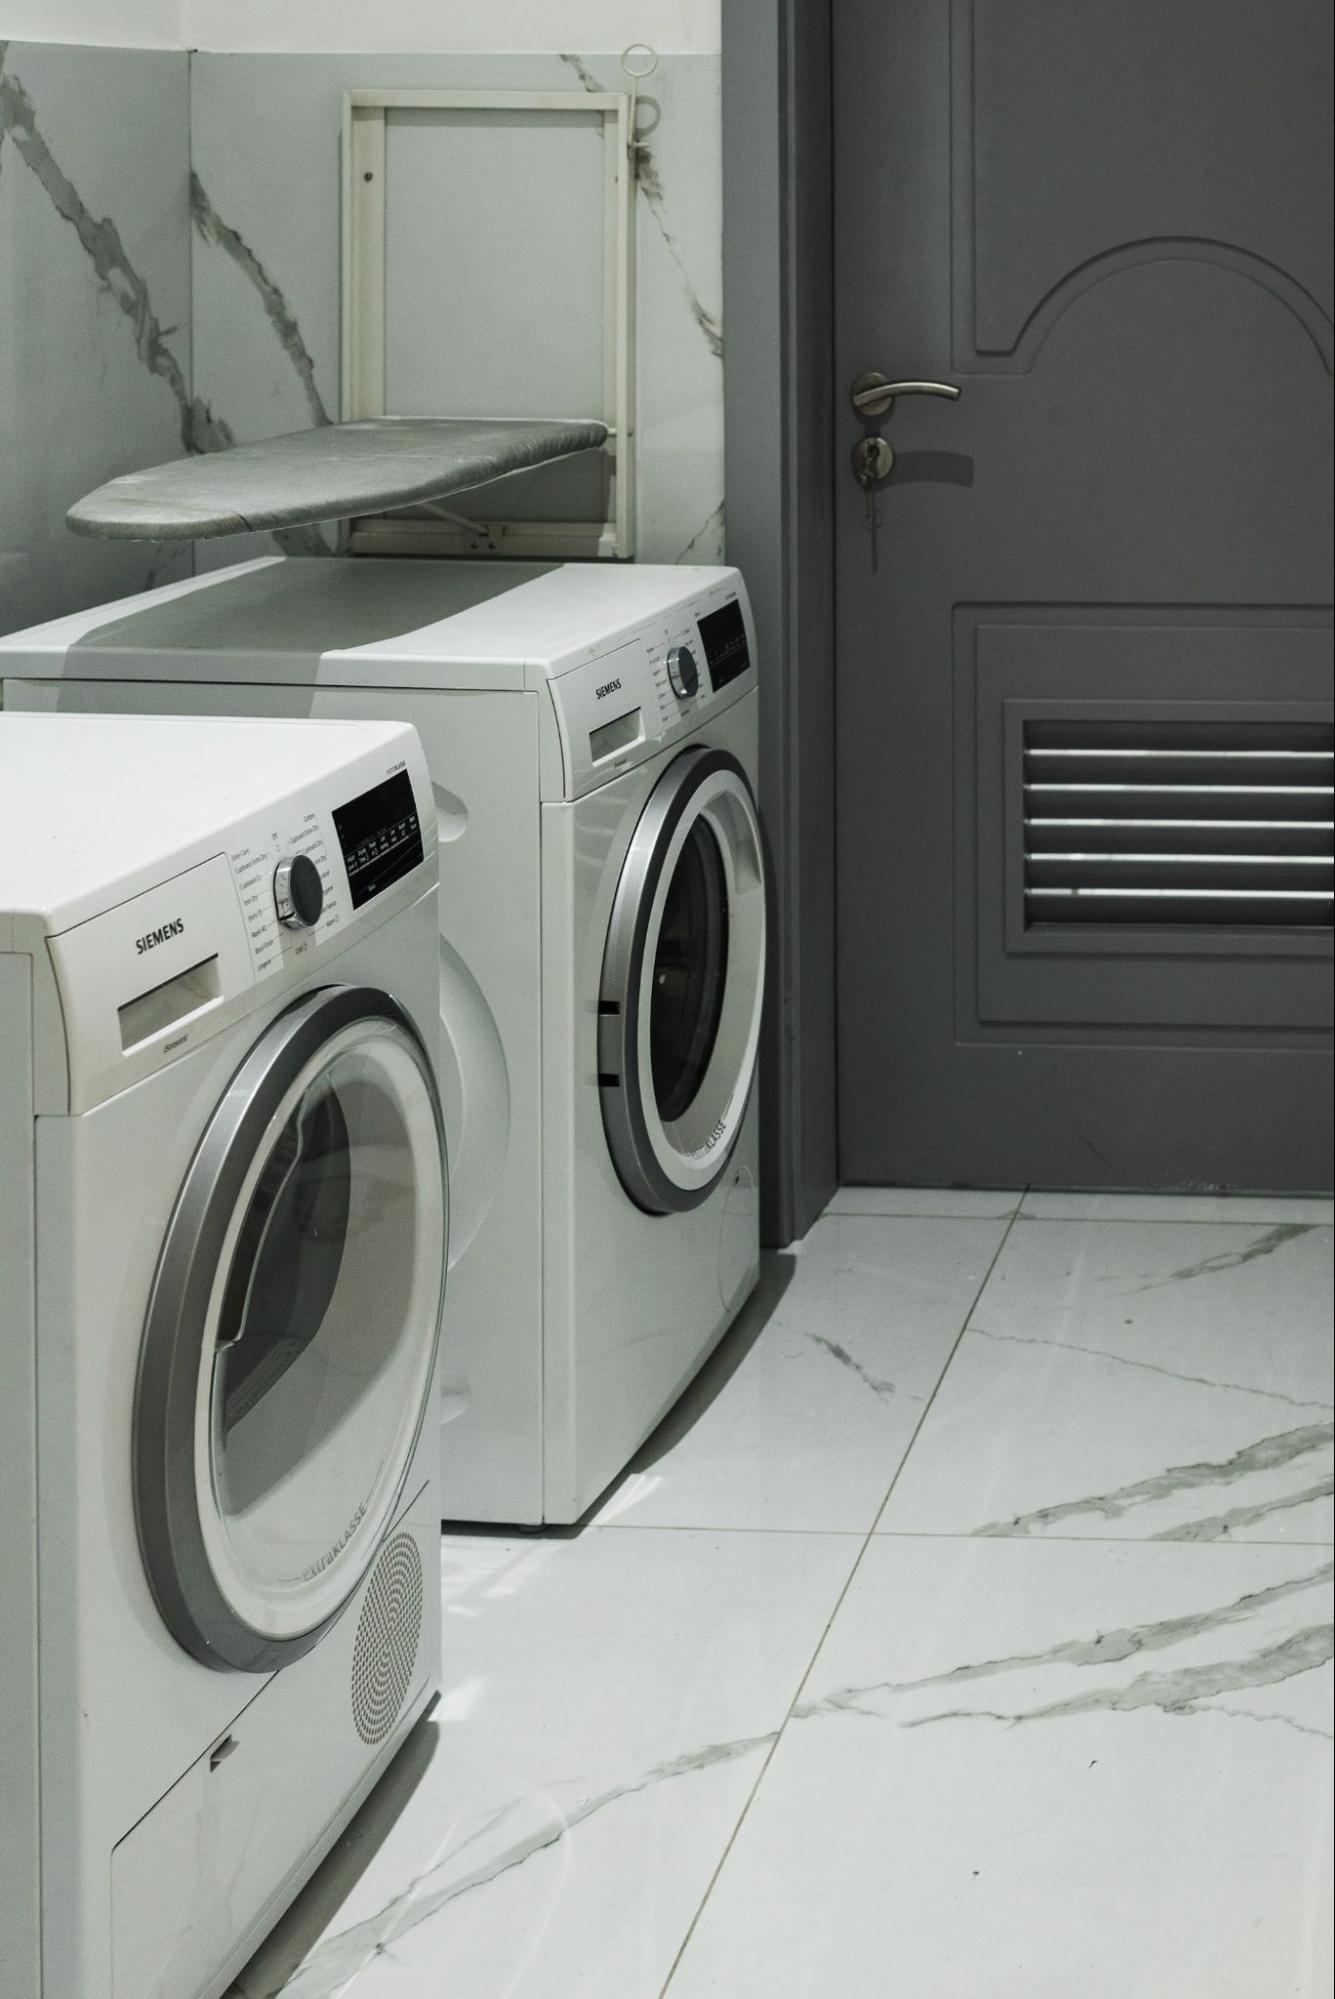 Home appliance warranties are transferable service agreements